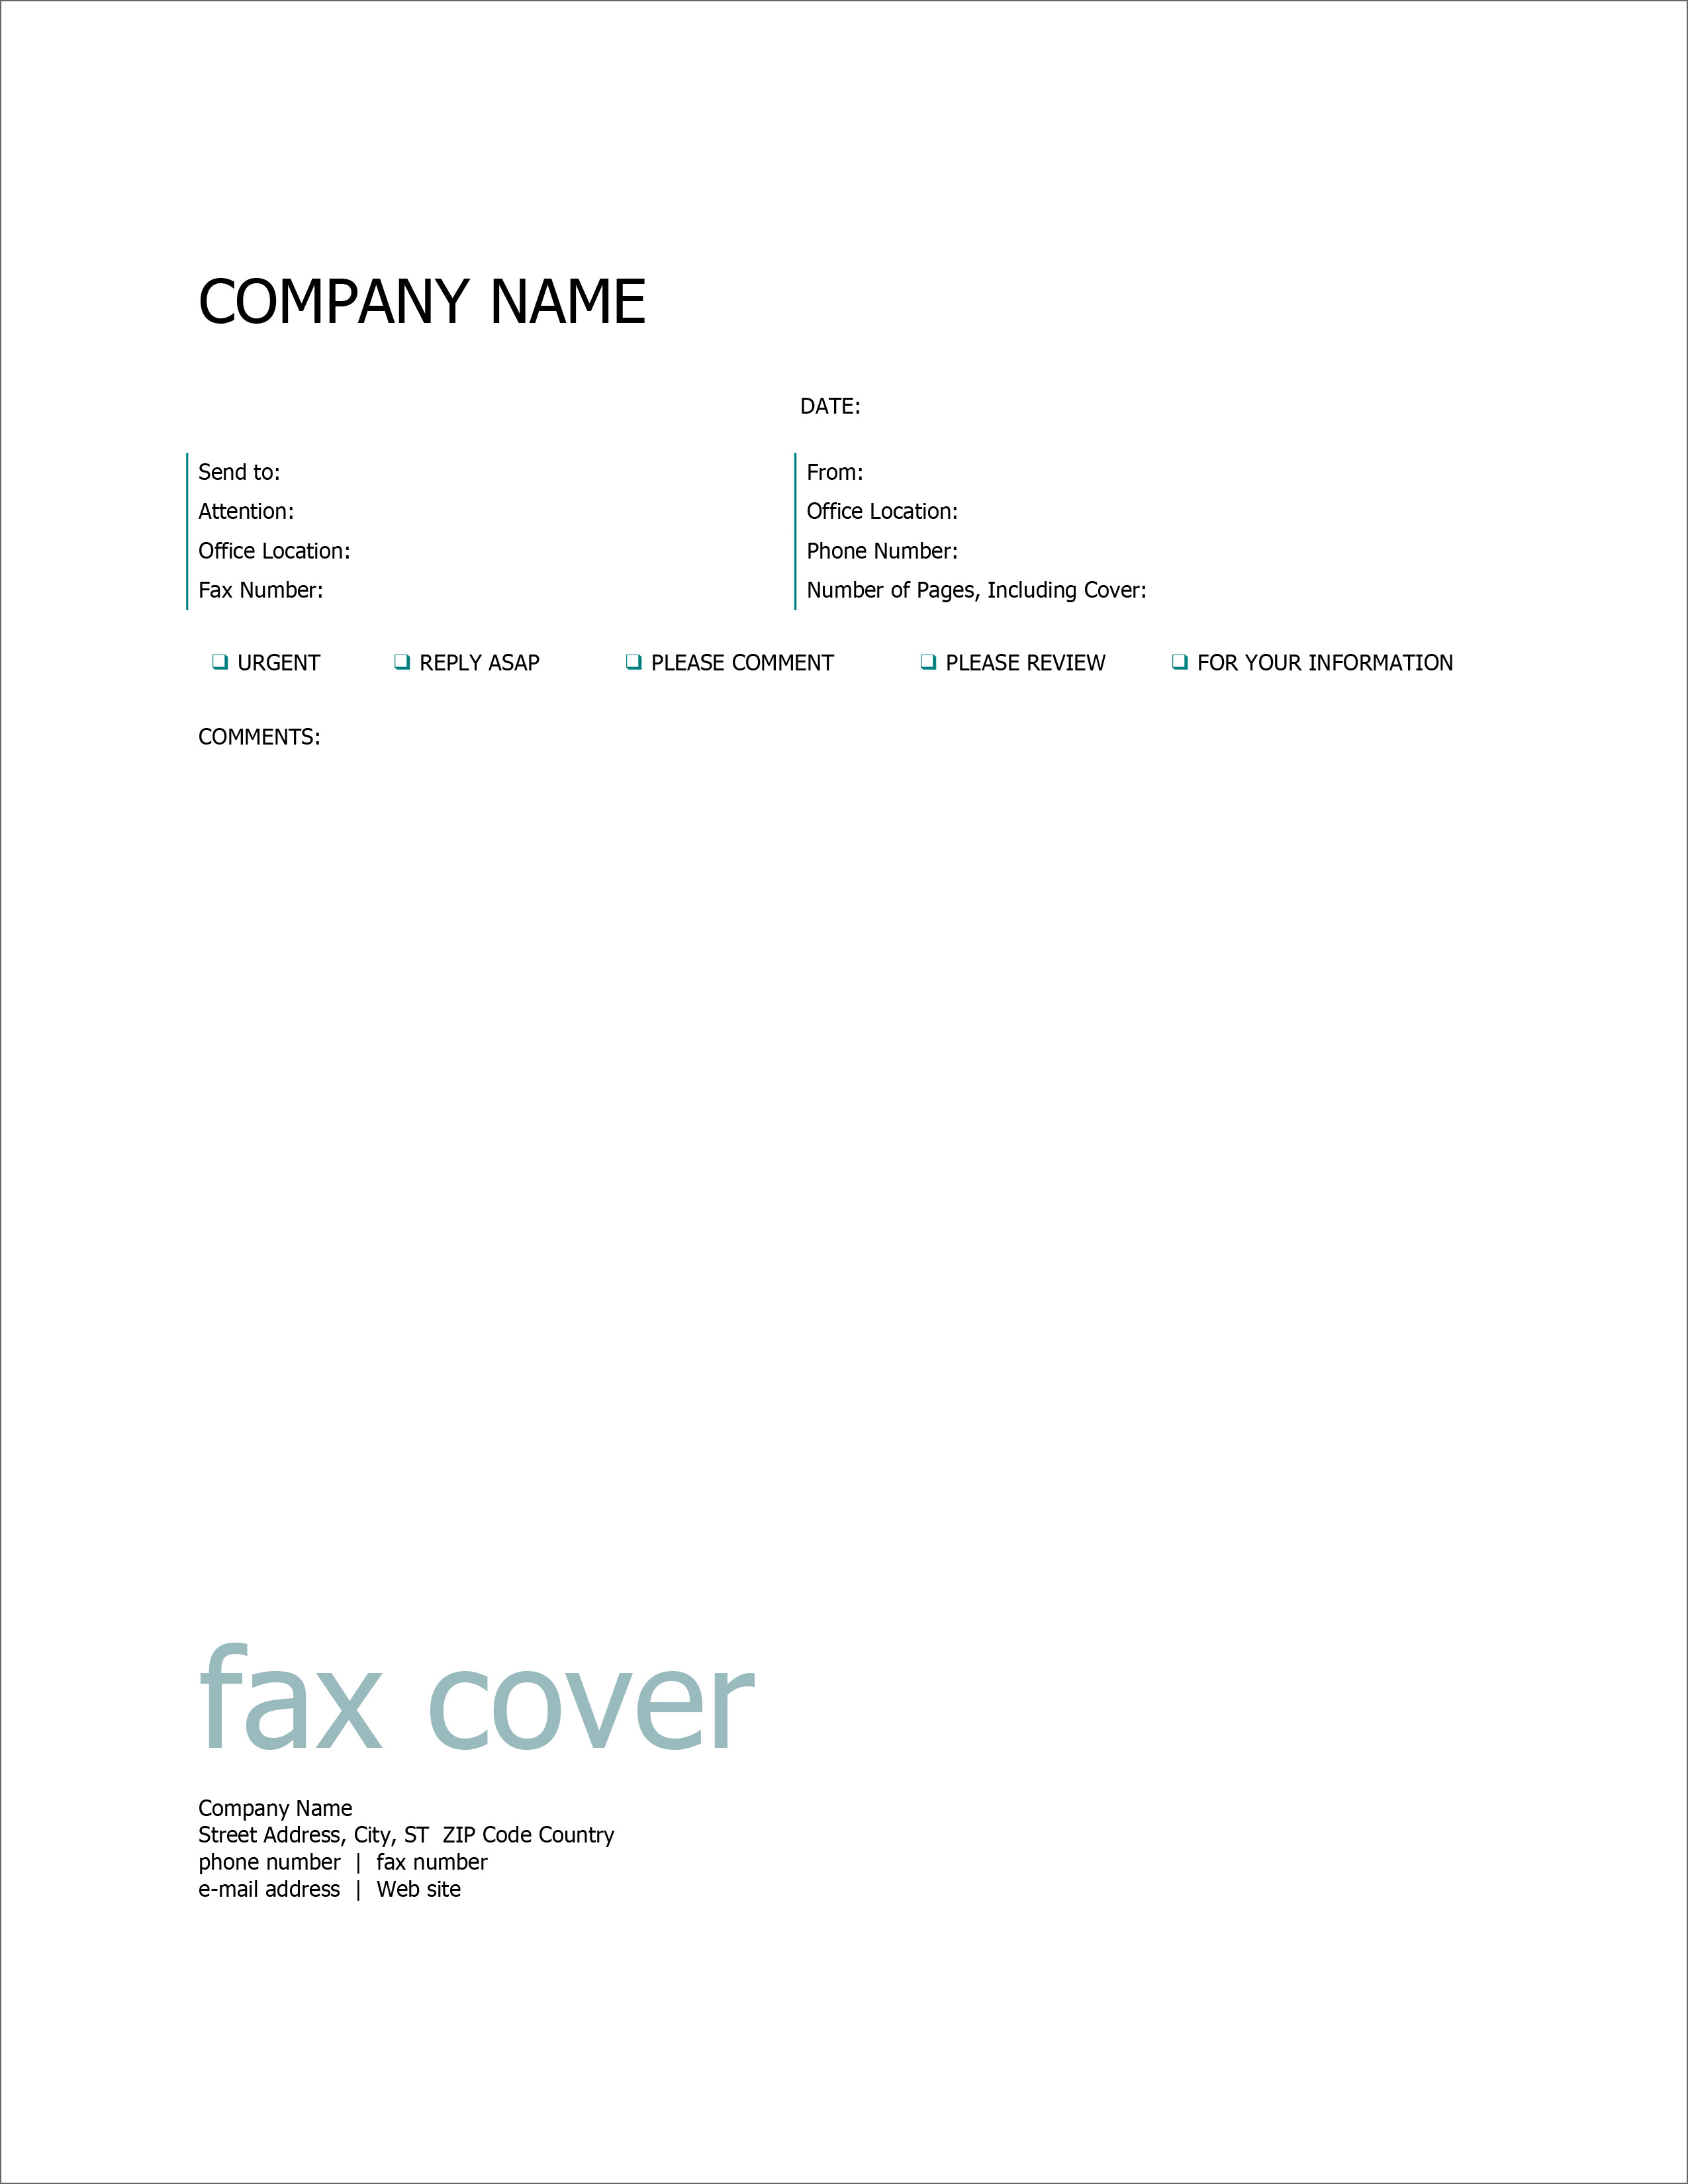 generic fax cover sheet for cleaning